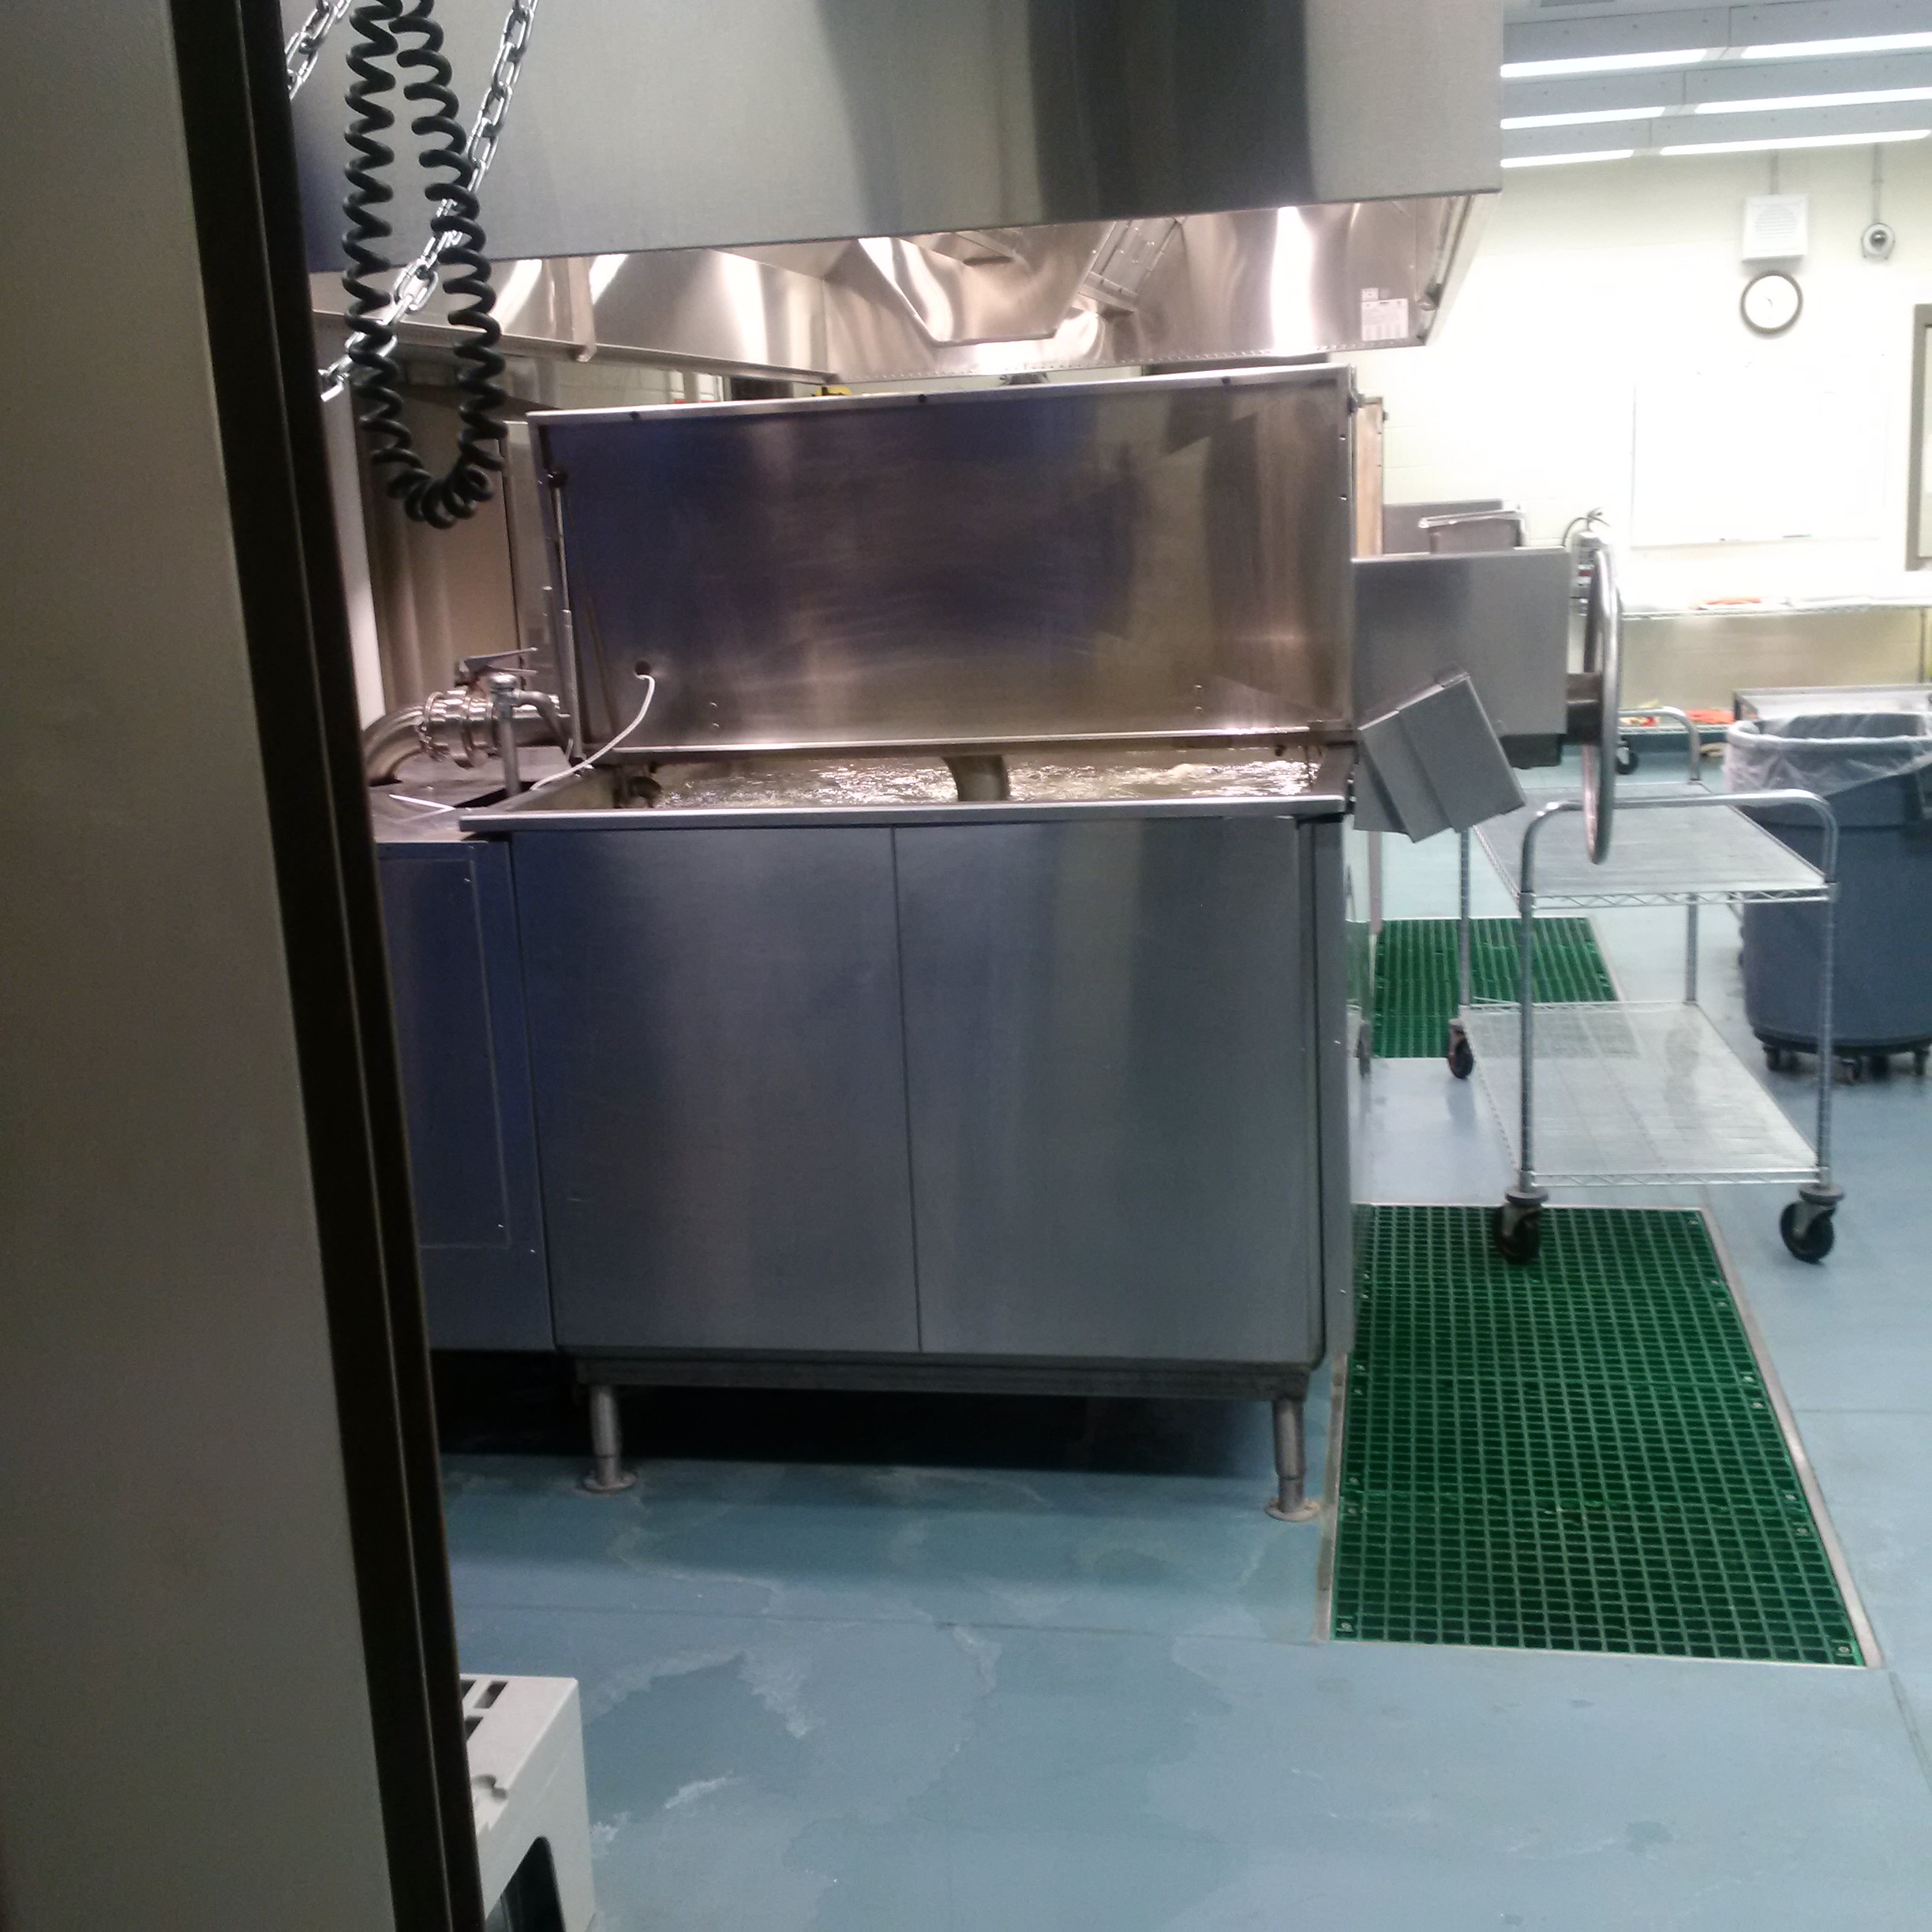 Photos of machinery used to prepare â€˜cook-chill' meals at Mission Institution